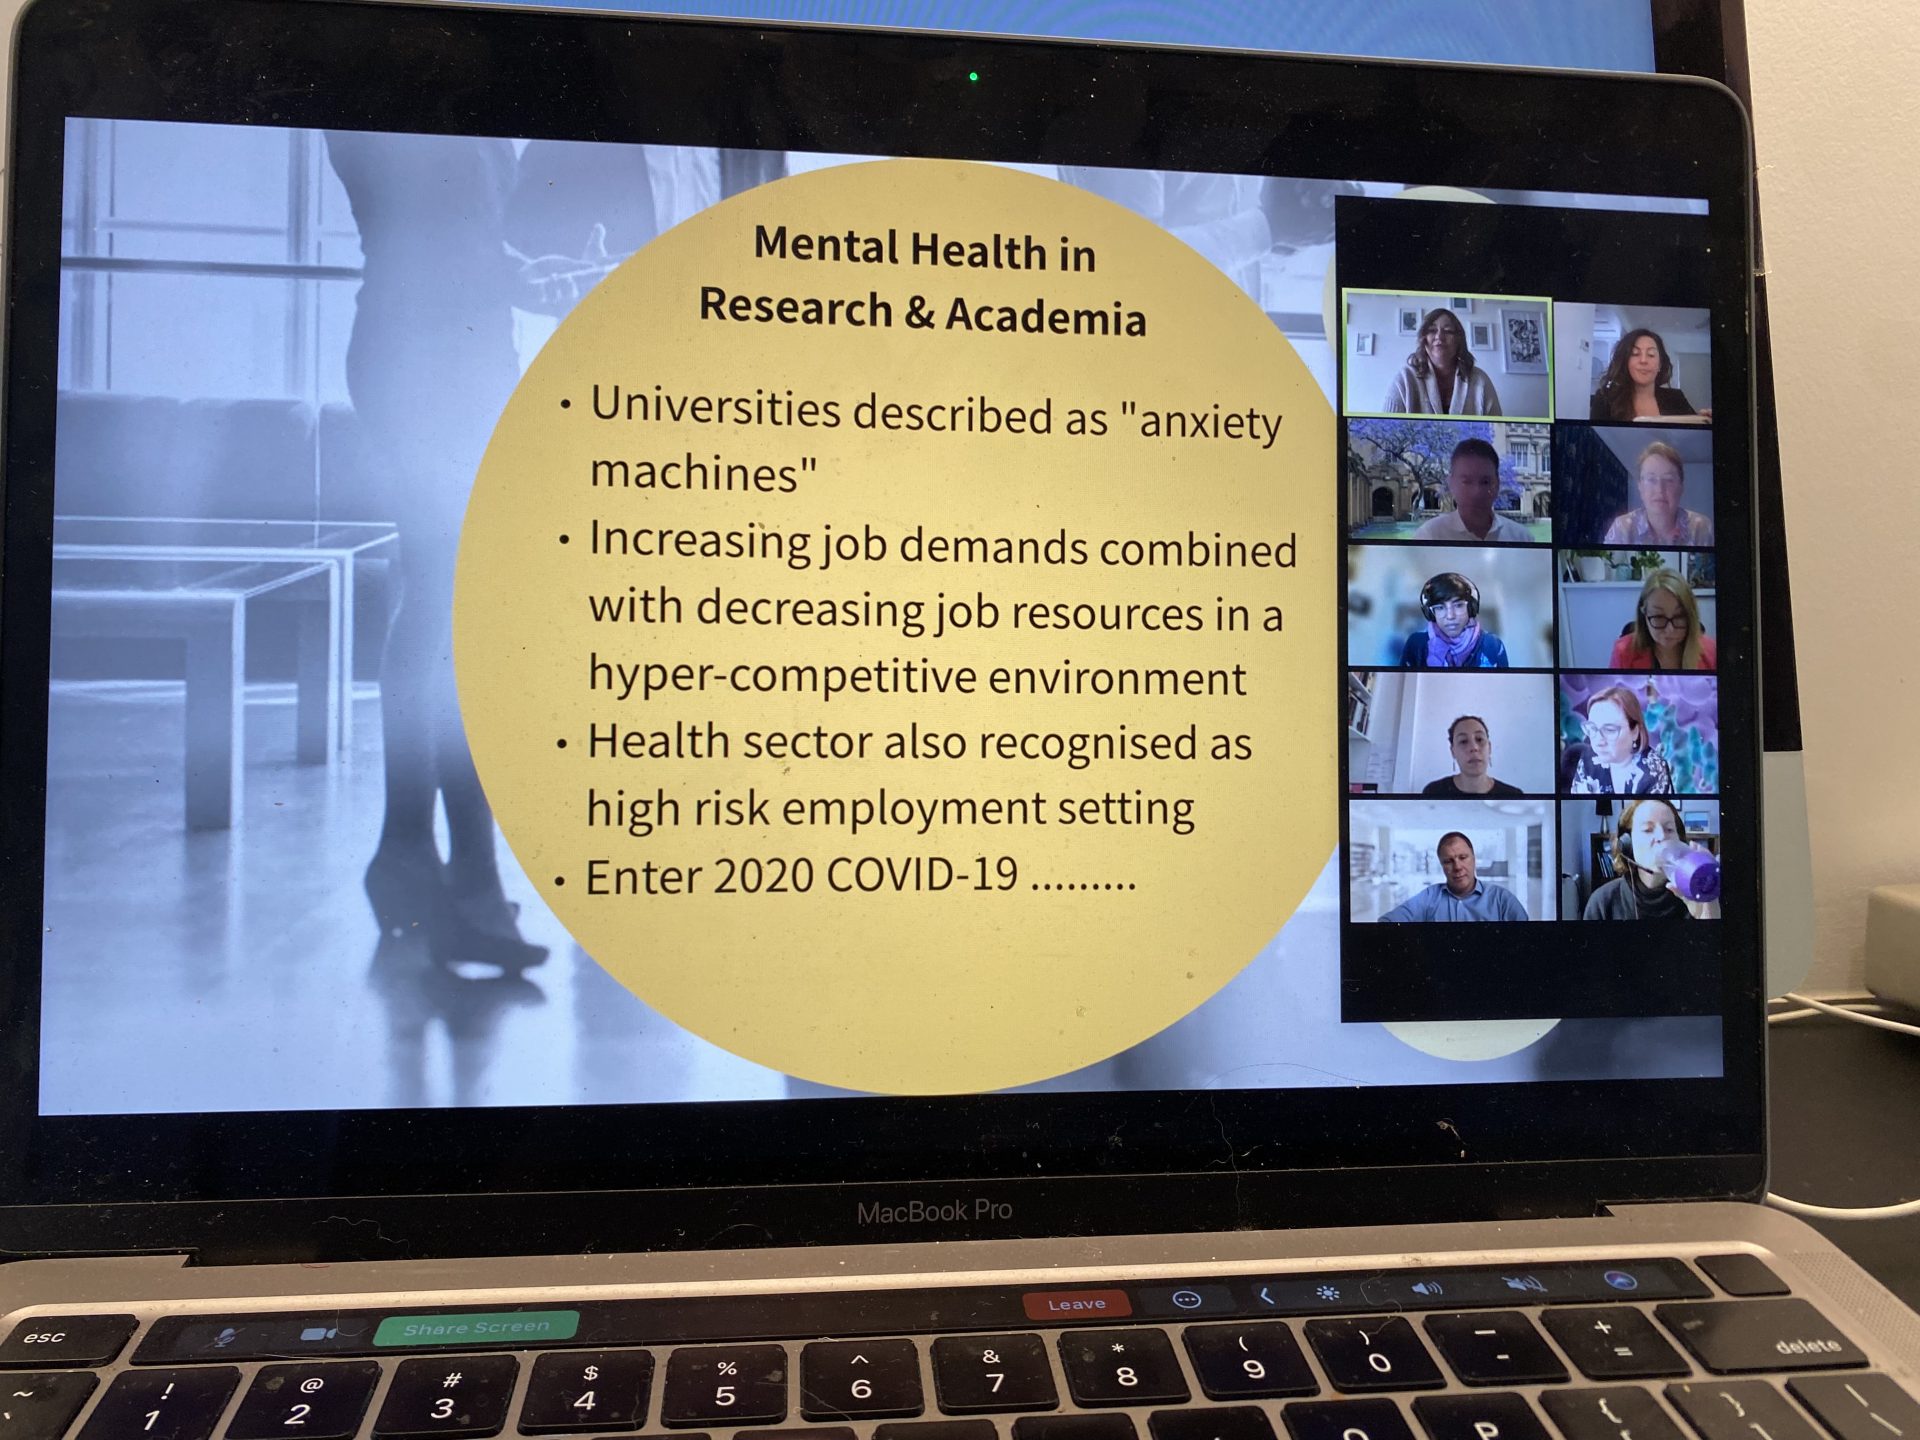 Laptop screen showing a slide from Angela Martin. The heading is Mental Health in Research and Academia. The dot points read: Universities described as "anxiety machines"; Increasing job demands combined with decreasing job resources in a hyper-competitive environment; health sector also recognised as high risk employment setting; Enter 2020 COVID-19